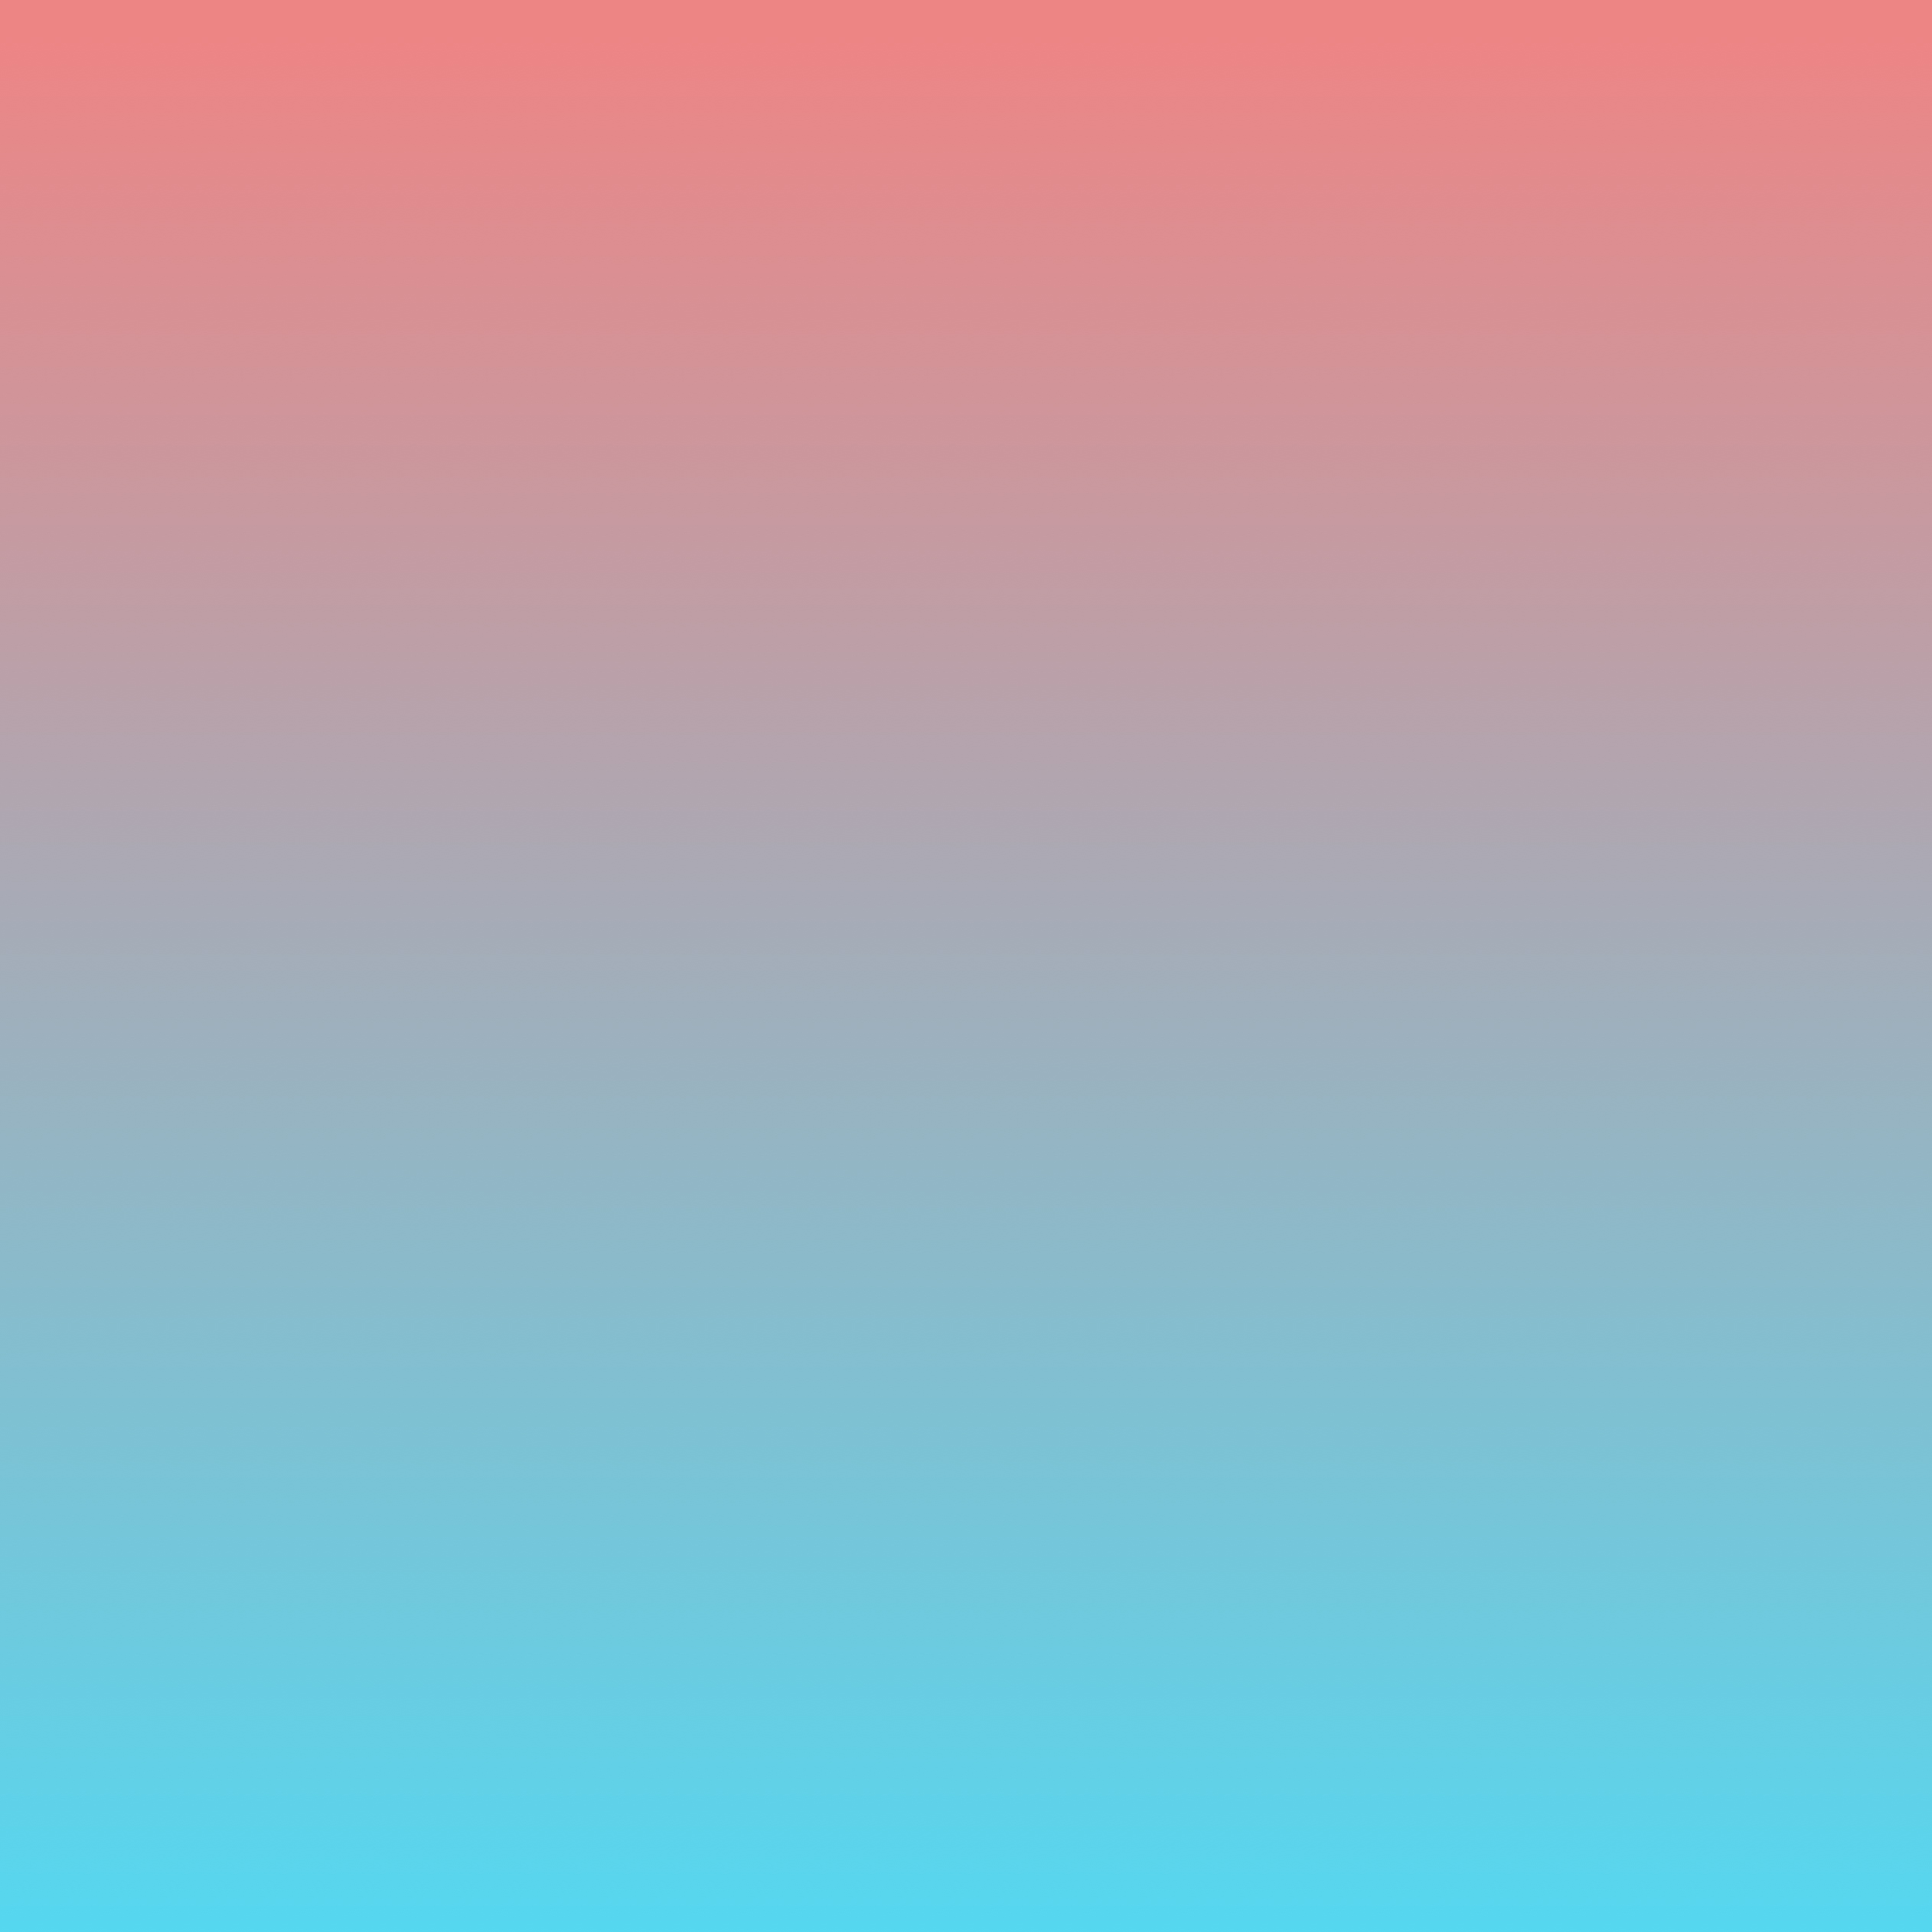 74751 Screensavers and Wallpapers Gradient for phone. Download gradient, abstract, background, pink, blue, multicolored, motley pictures for free